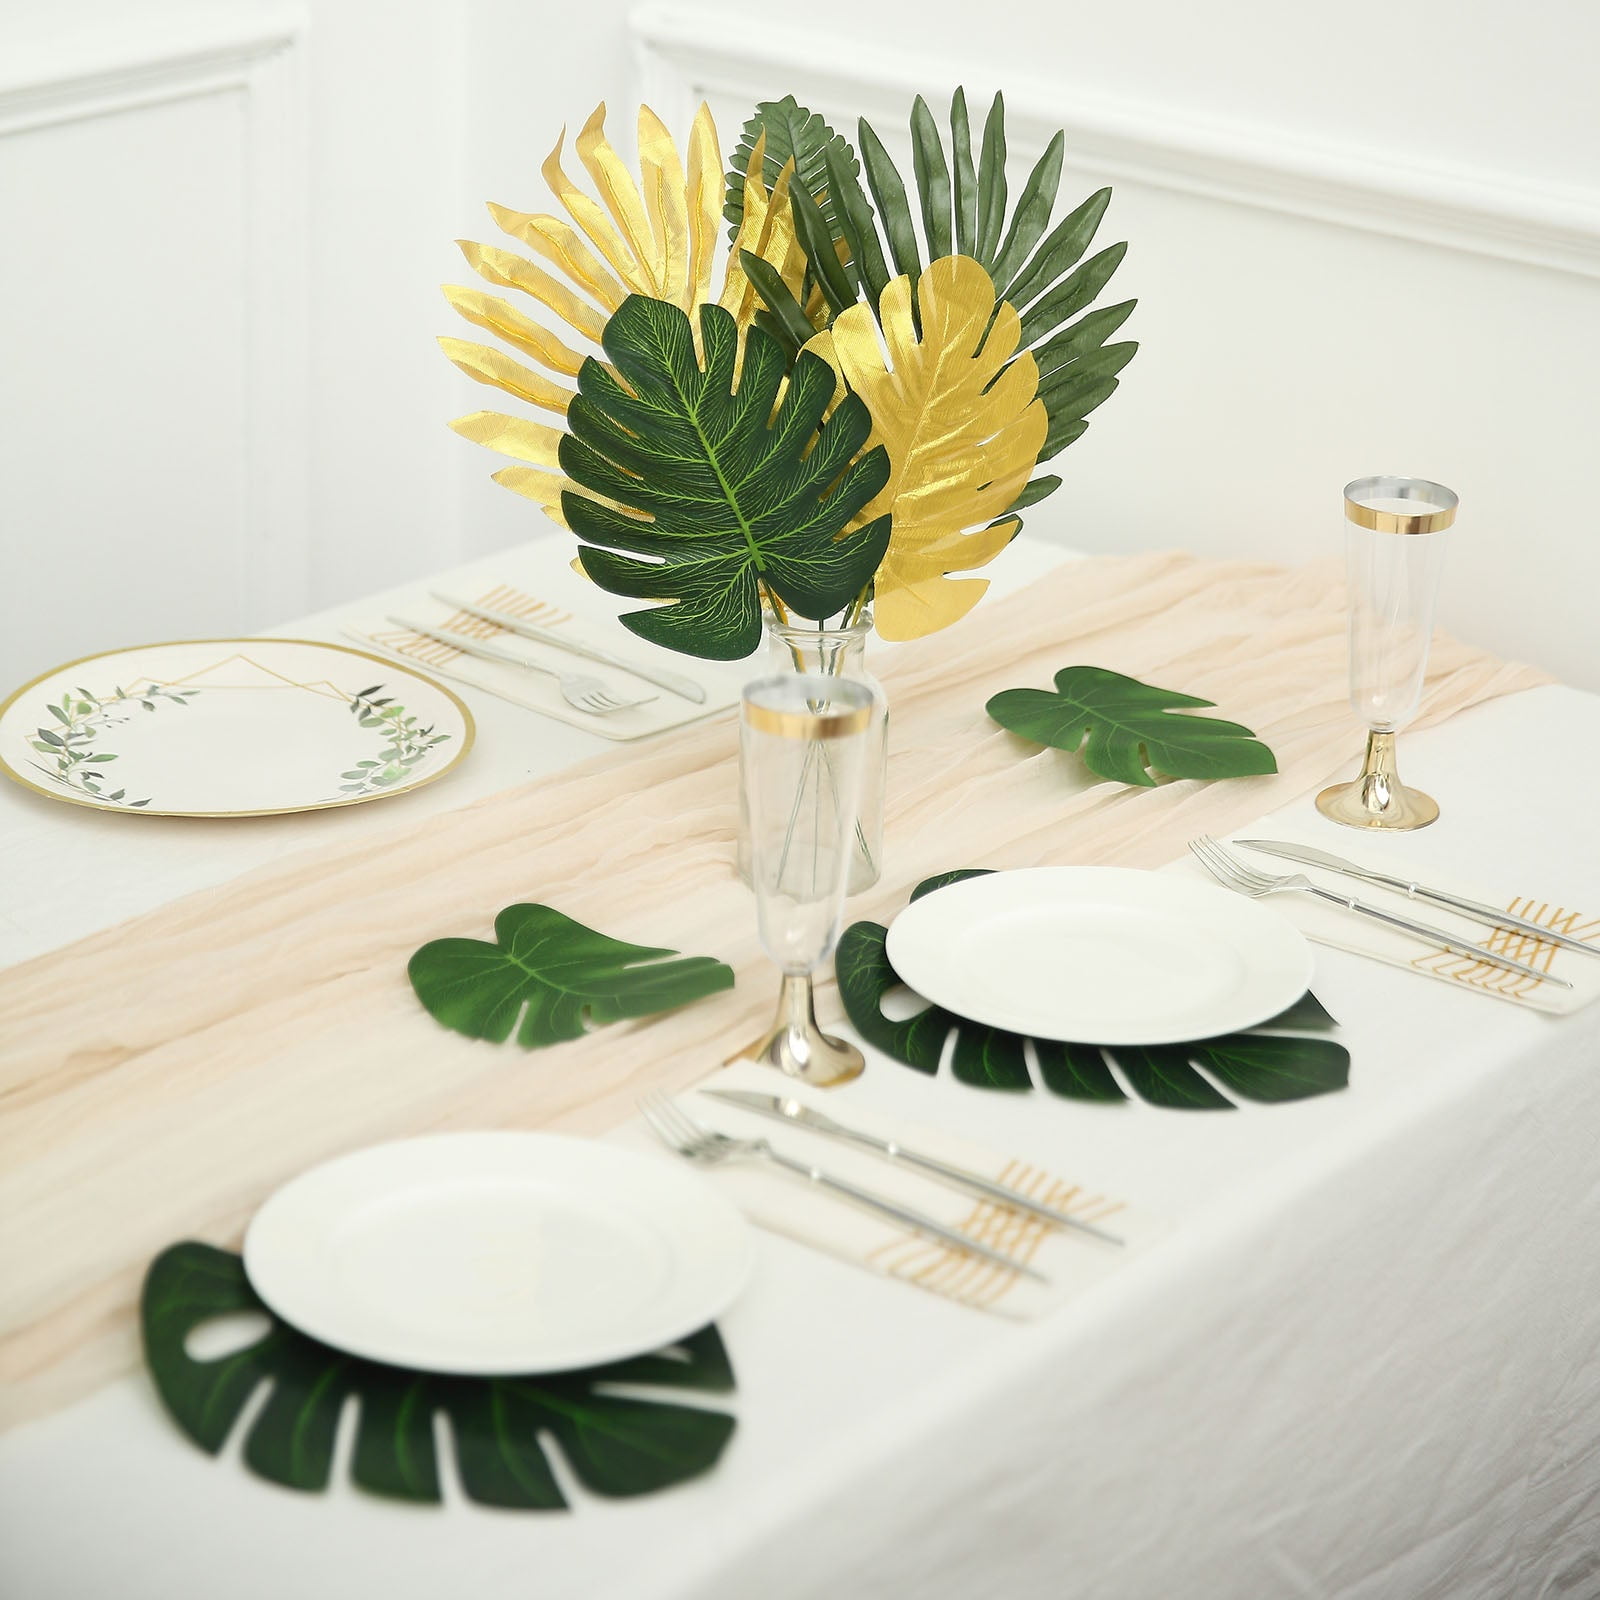  72PCS Artificial Palm Leaves 11 Kinds Tropical Monstera Plant  Jungle Theme Party Gold Leaves Decorations for Baby Shower Party Wedding  Table Decorations (Golden+Green Leaves) : Home & Kitchen